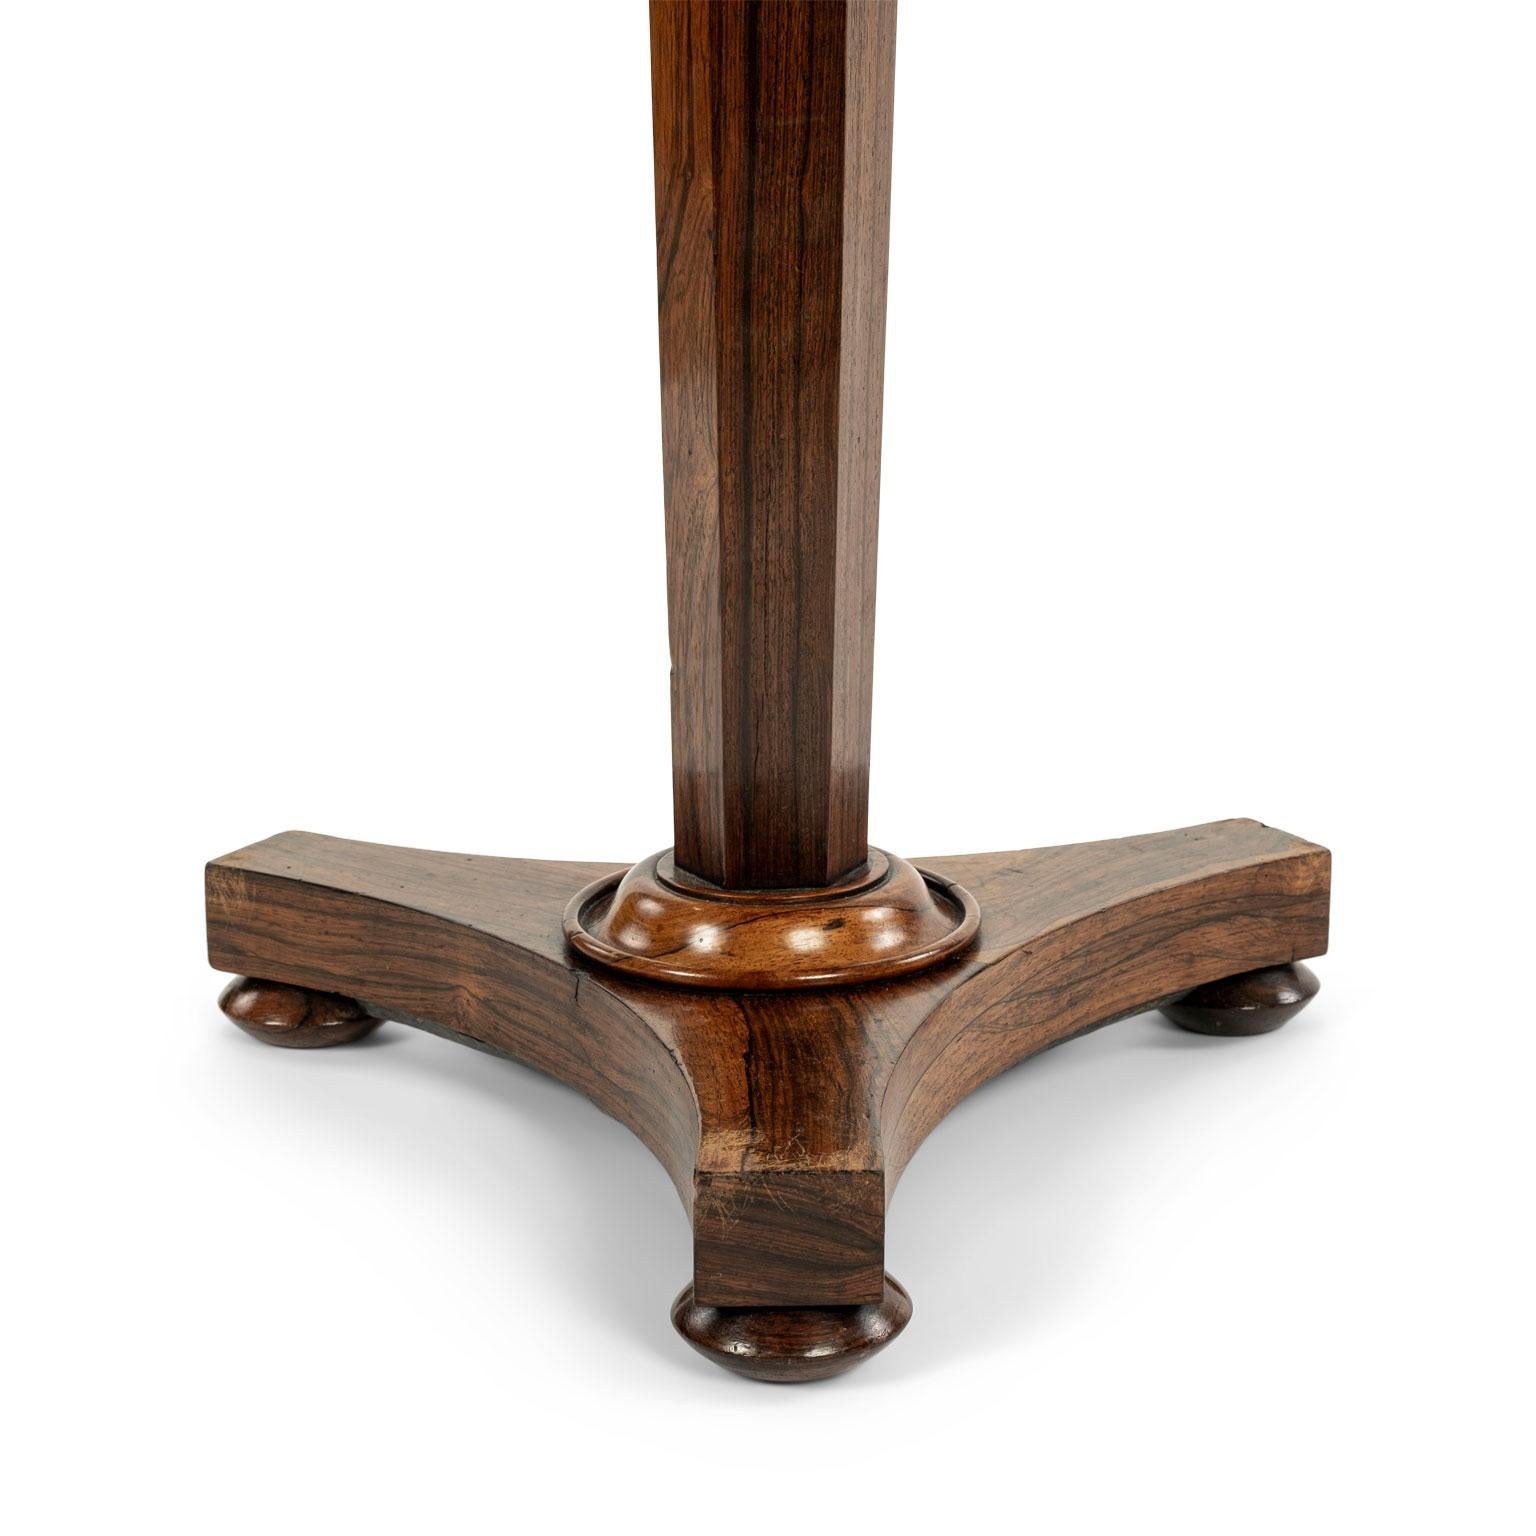 Mahogany and rosewood octagonal-top pedestal table: mahogany octagonal top with raised gallery edge upon rosewood pedestal base supported by three bun feet. Circa 1810-1830, England.